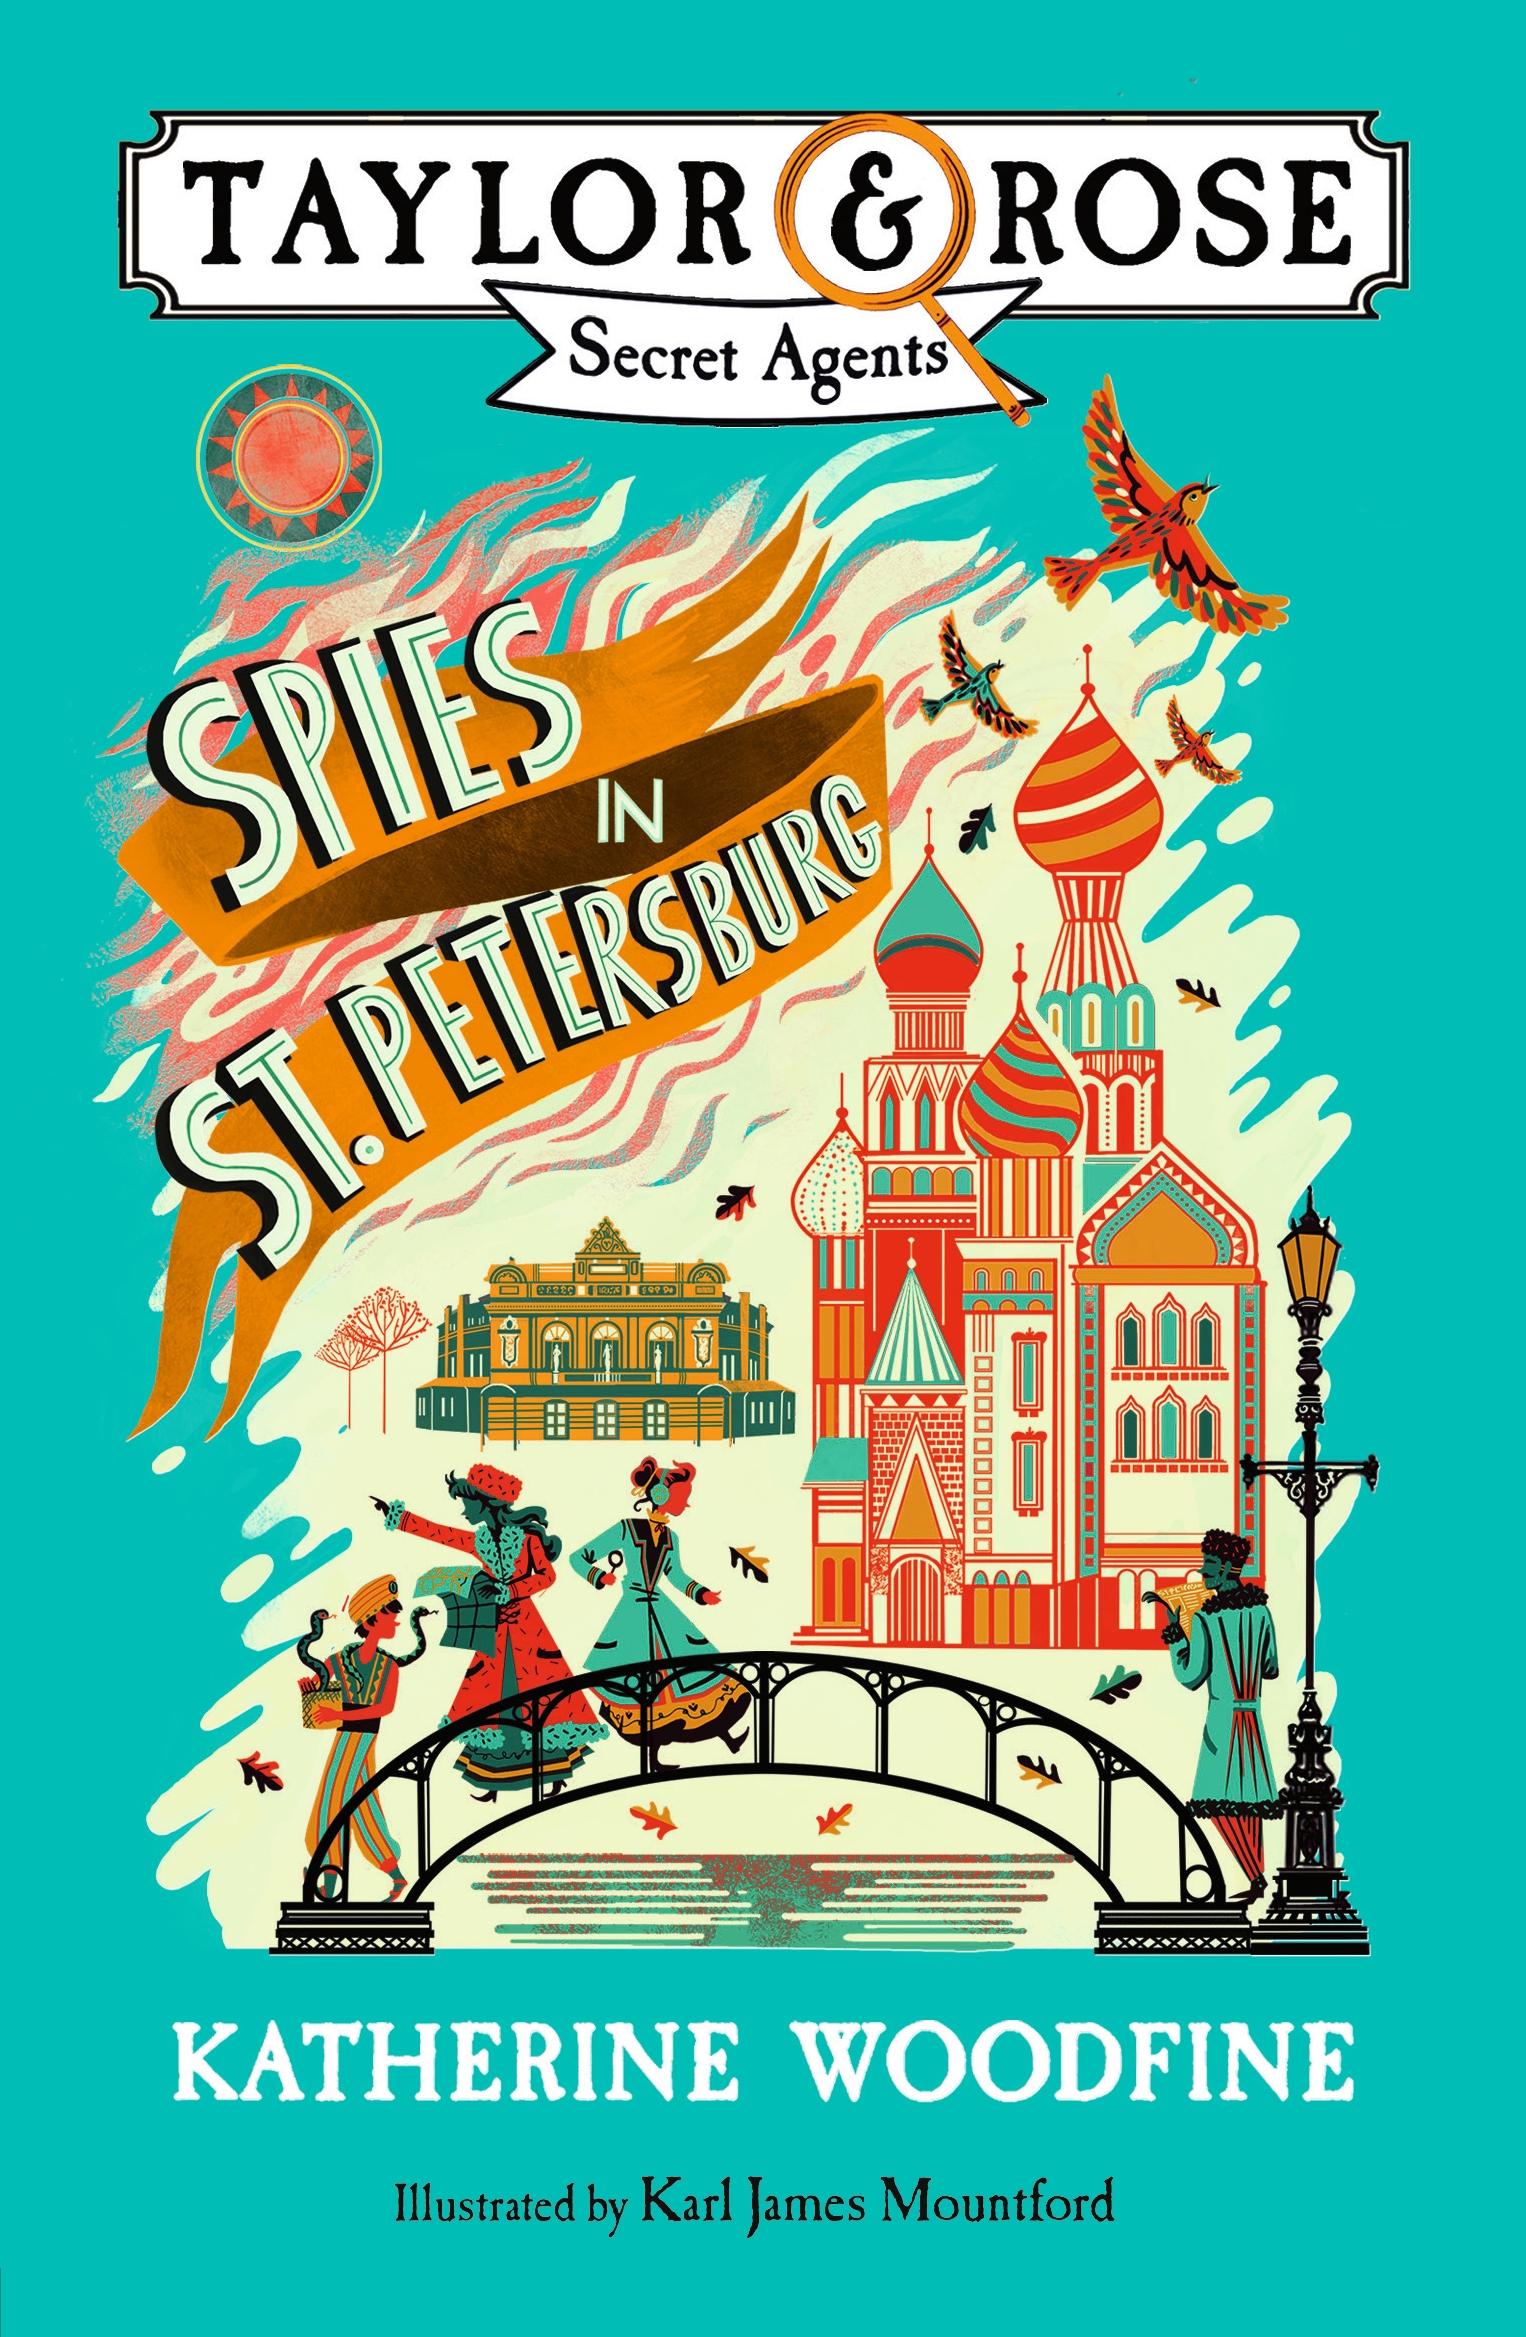 Taylor and Rose Secret Agents T.02 - Spies in St. Petersburg  | Woodfine, Katherine